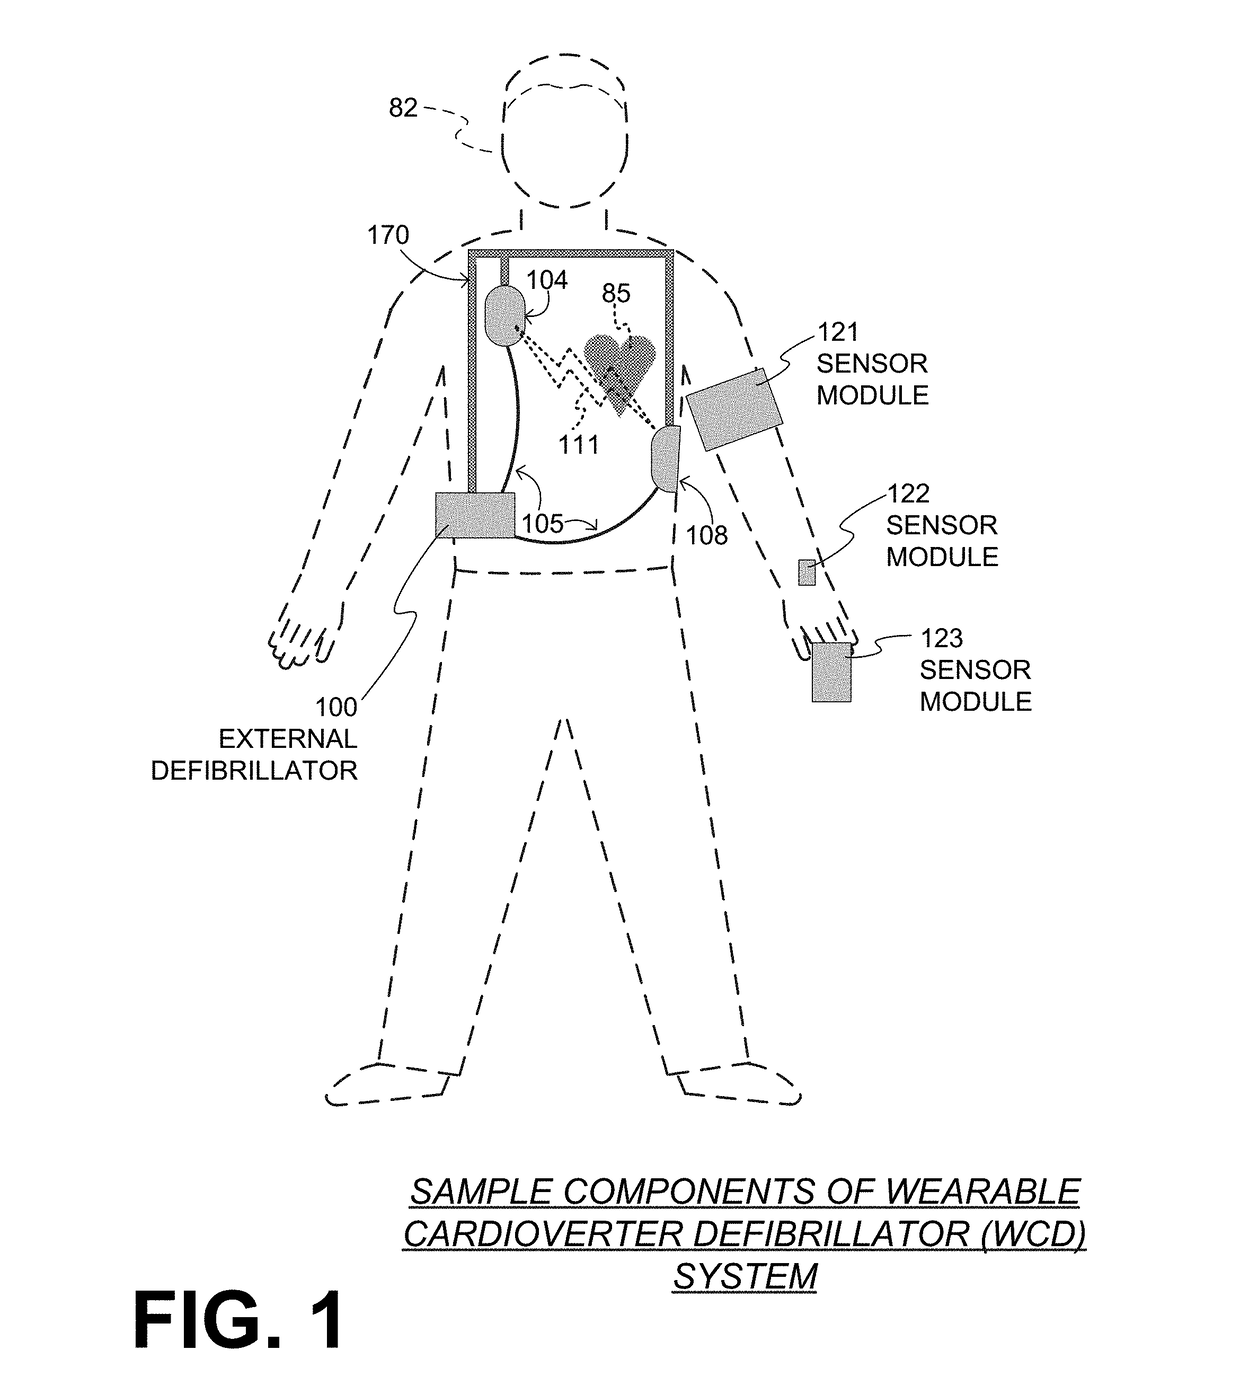 Wearable cardioverter defibrillator (WCD) system using sensor modules with reassurance code for confirmation before shock